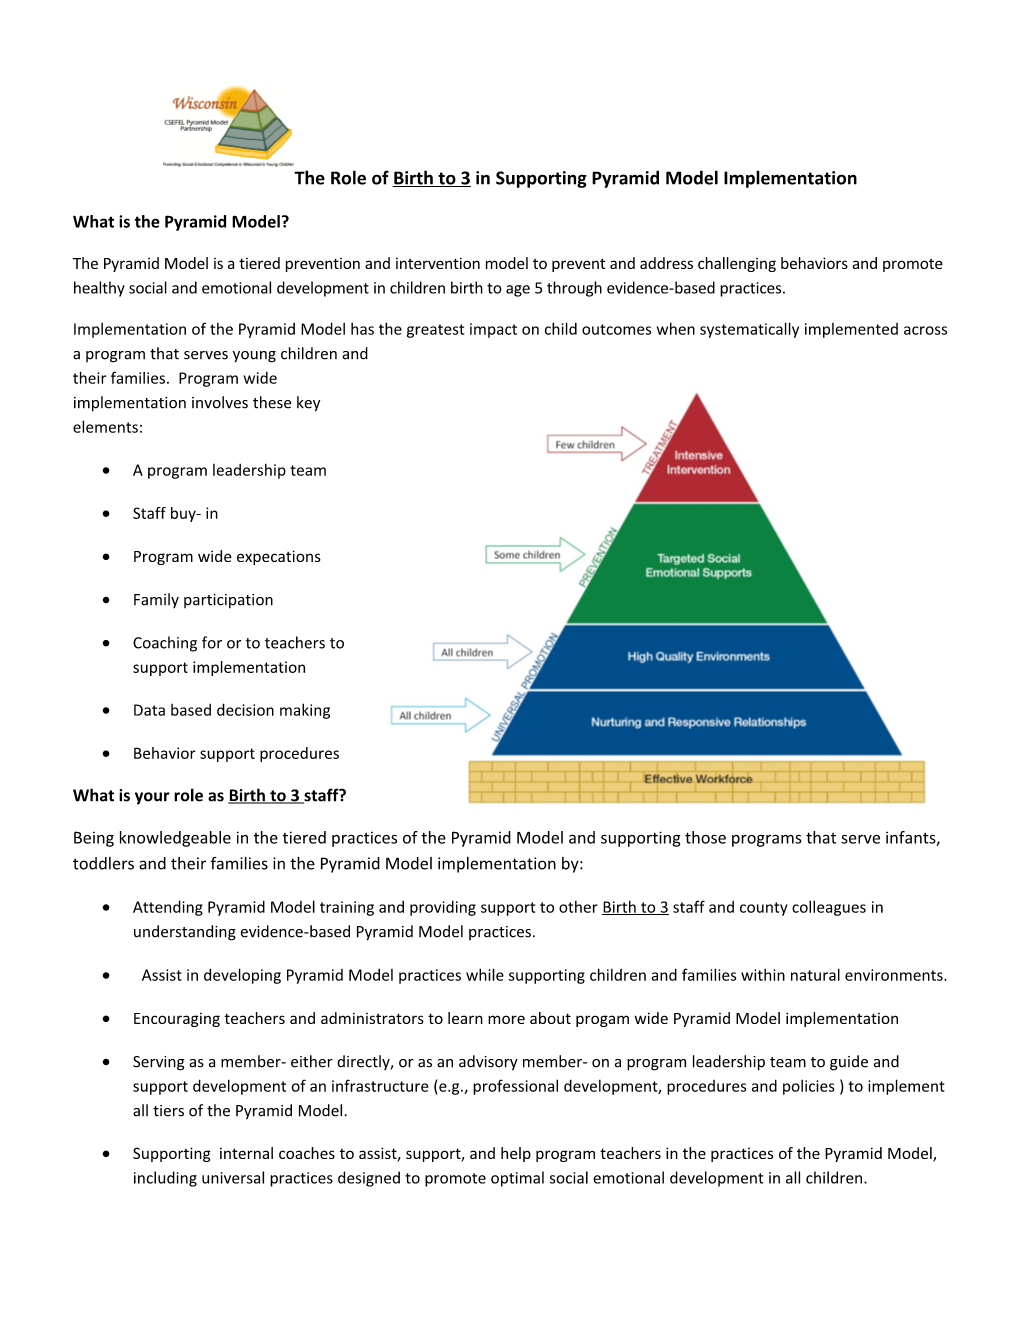 The Role of Birth to 3 in Supporting Pyramid Model Implementation